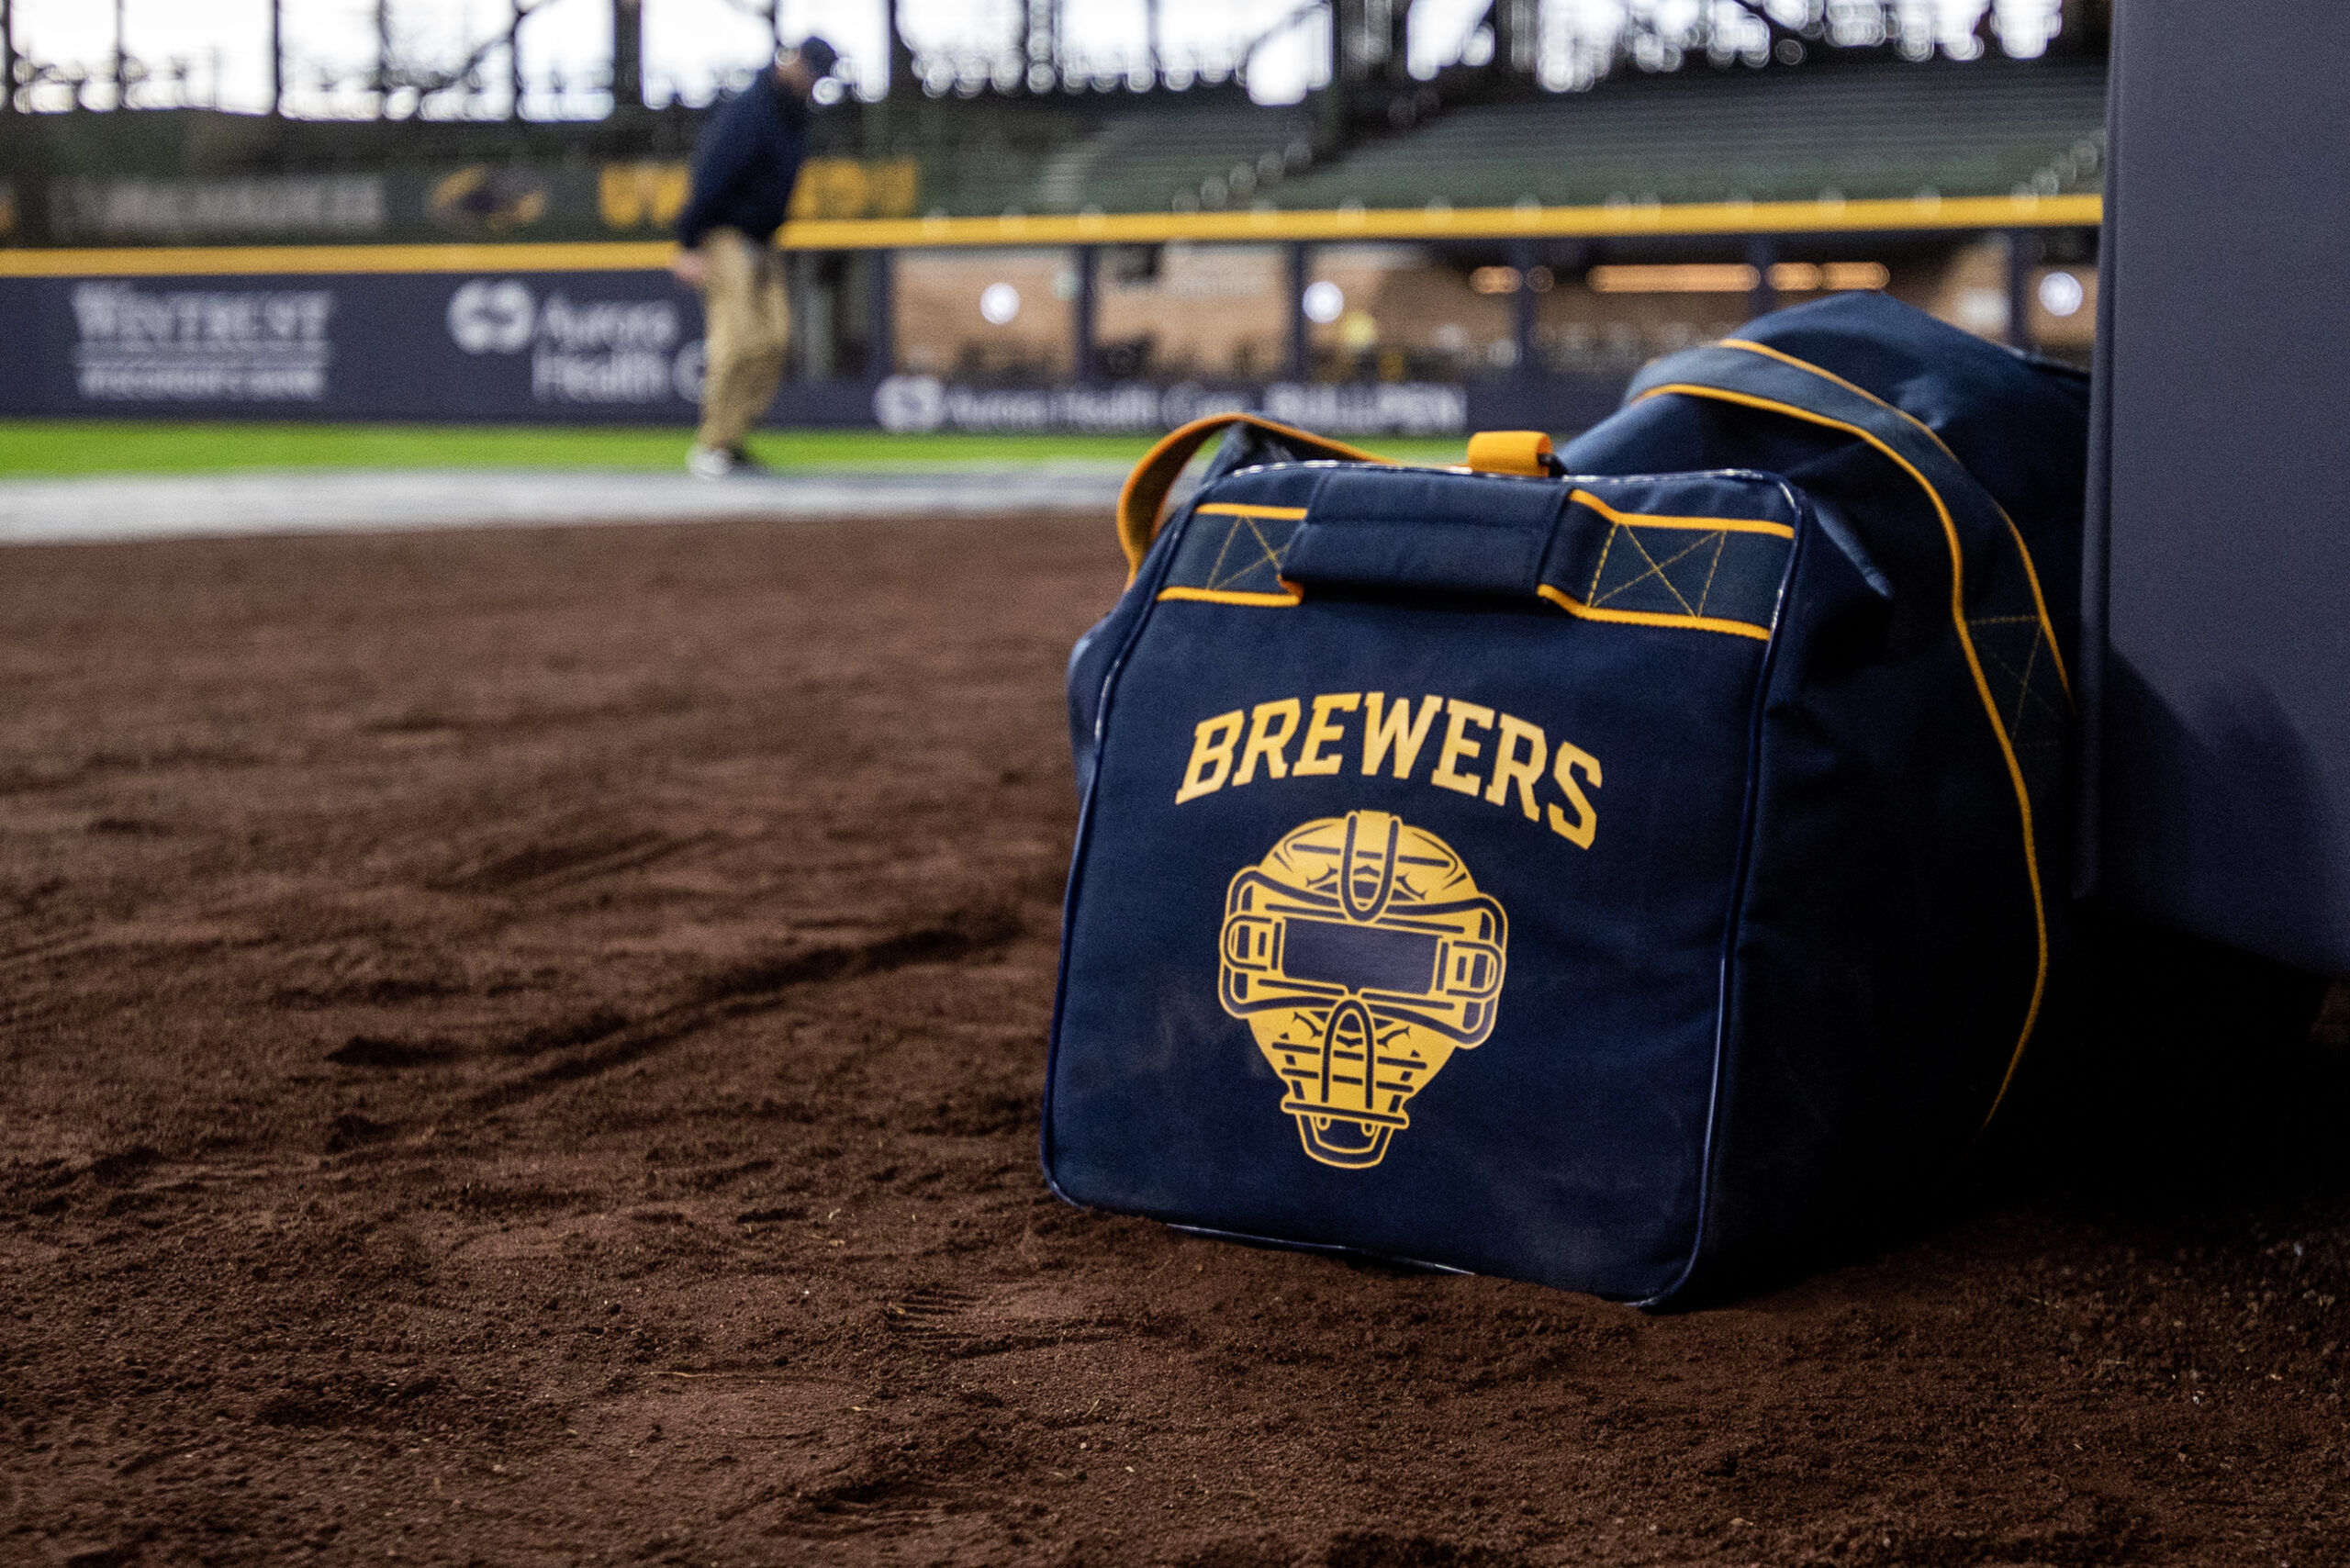 Opening day for Brewers, Wisconsin poetry, Financial advice for millennials